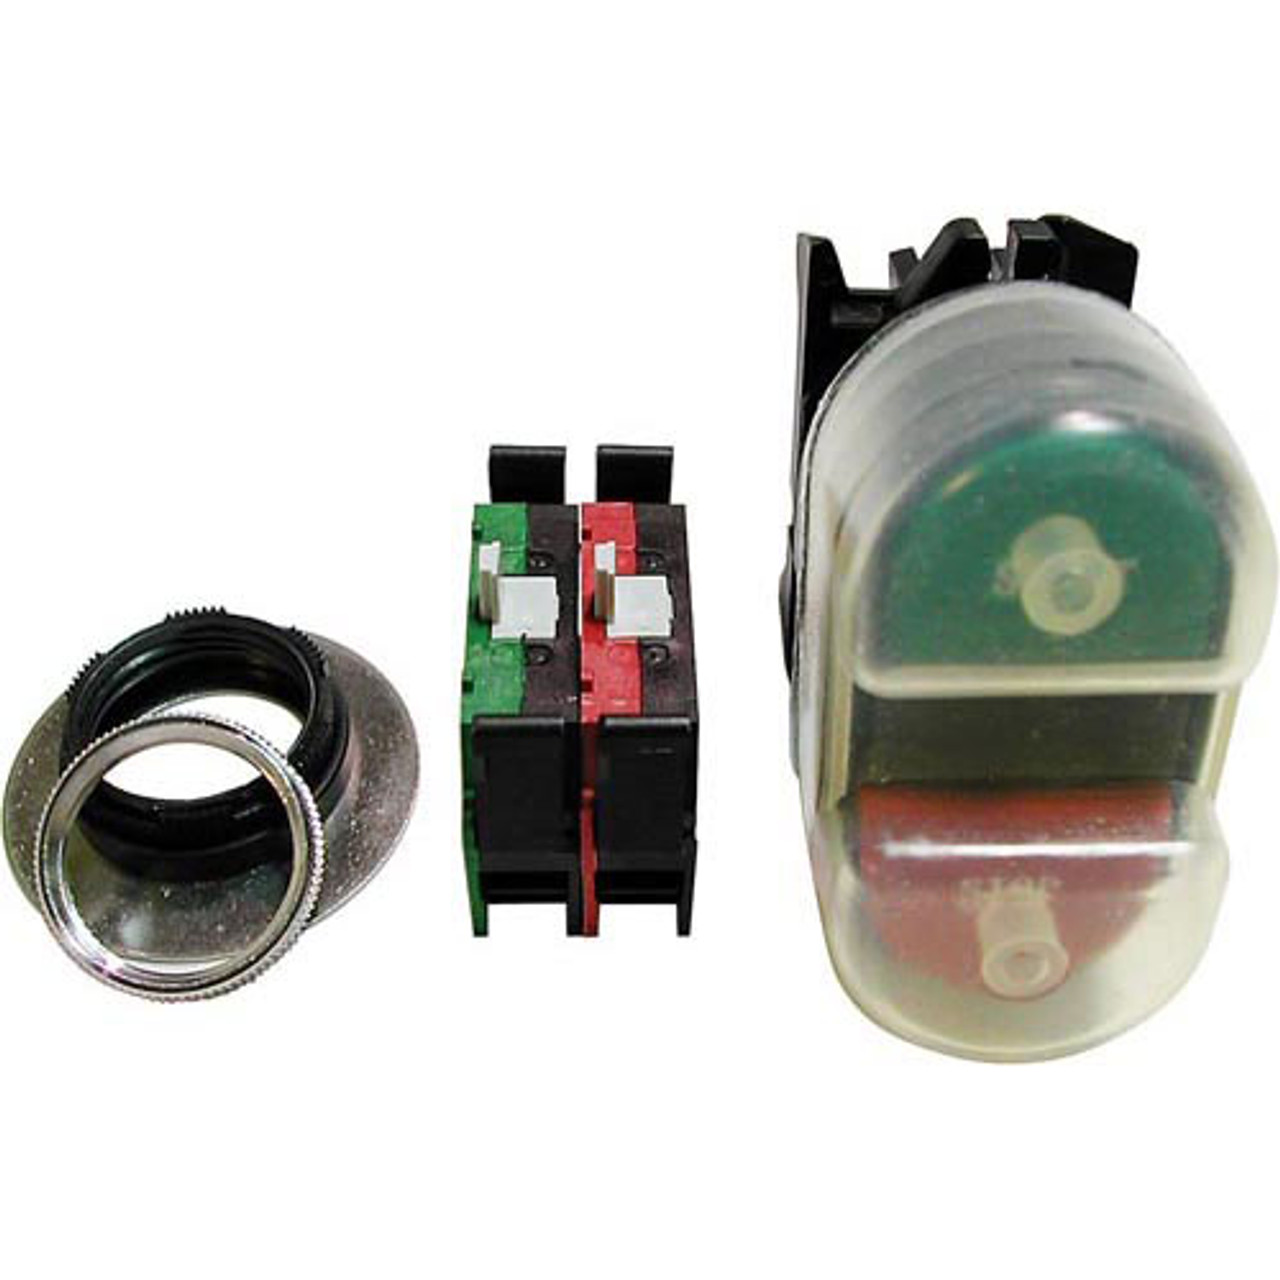 Oval Push Switch Kit - Replacement Part For Berkel 404975-00404